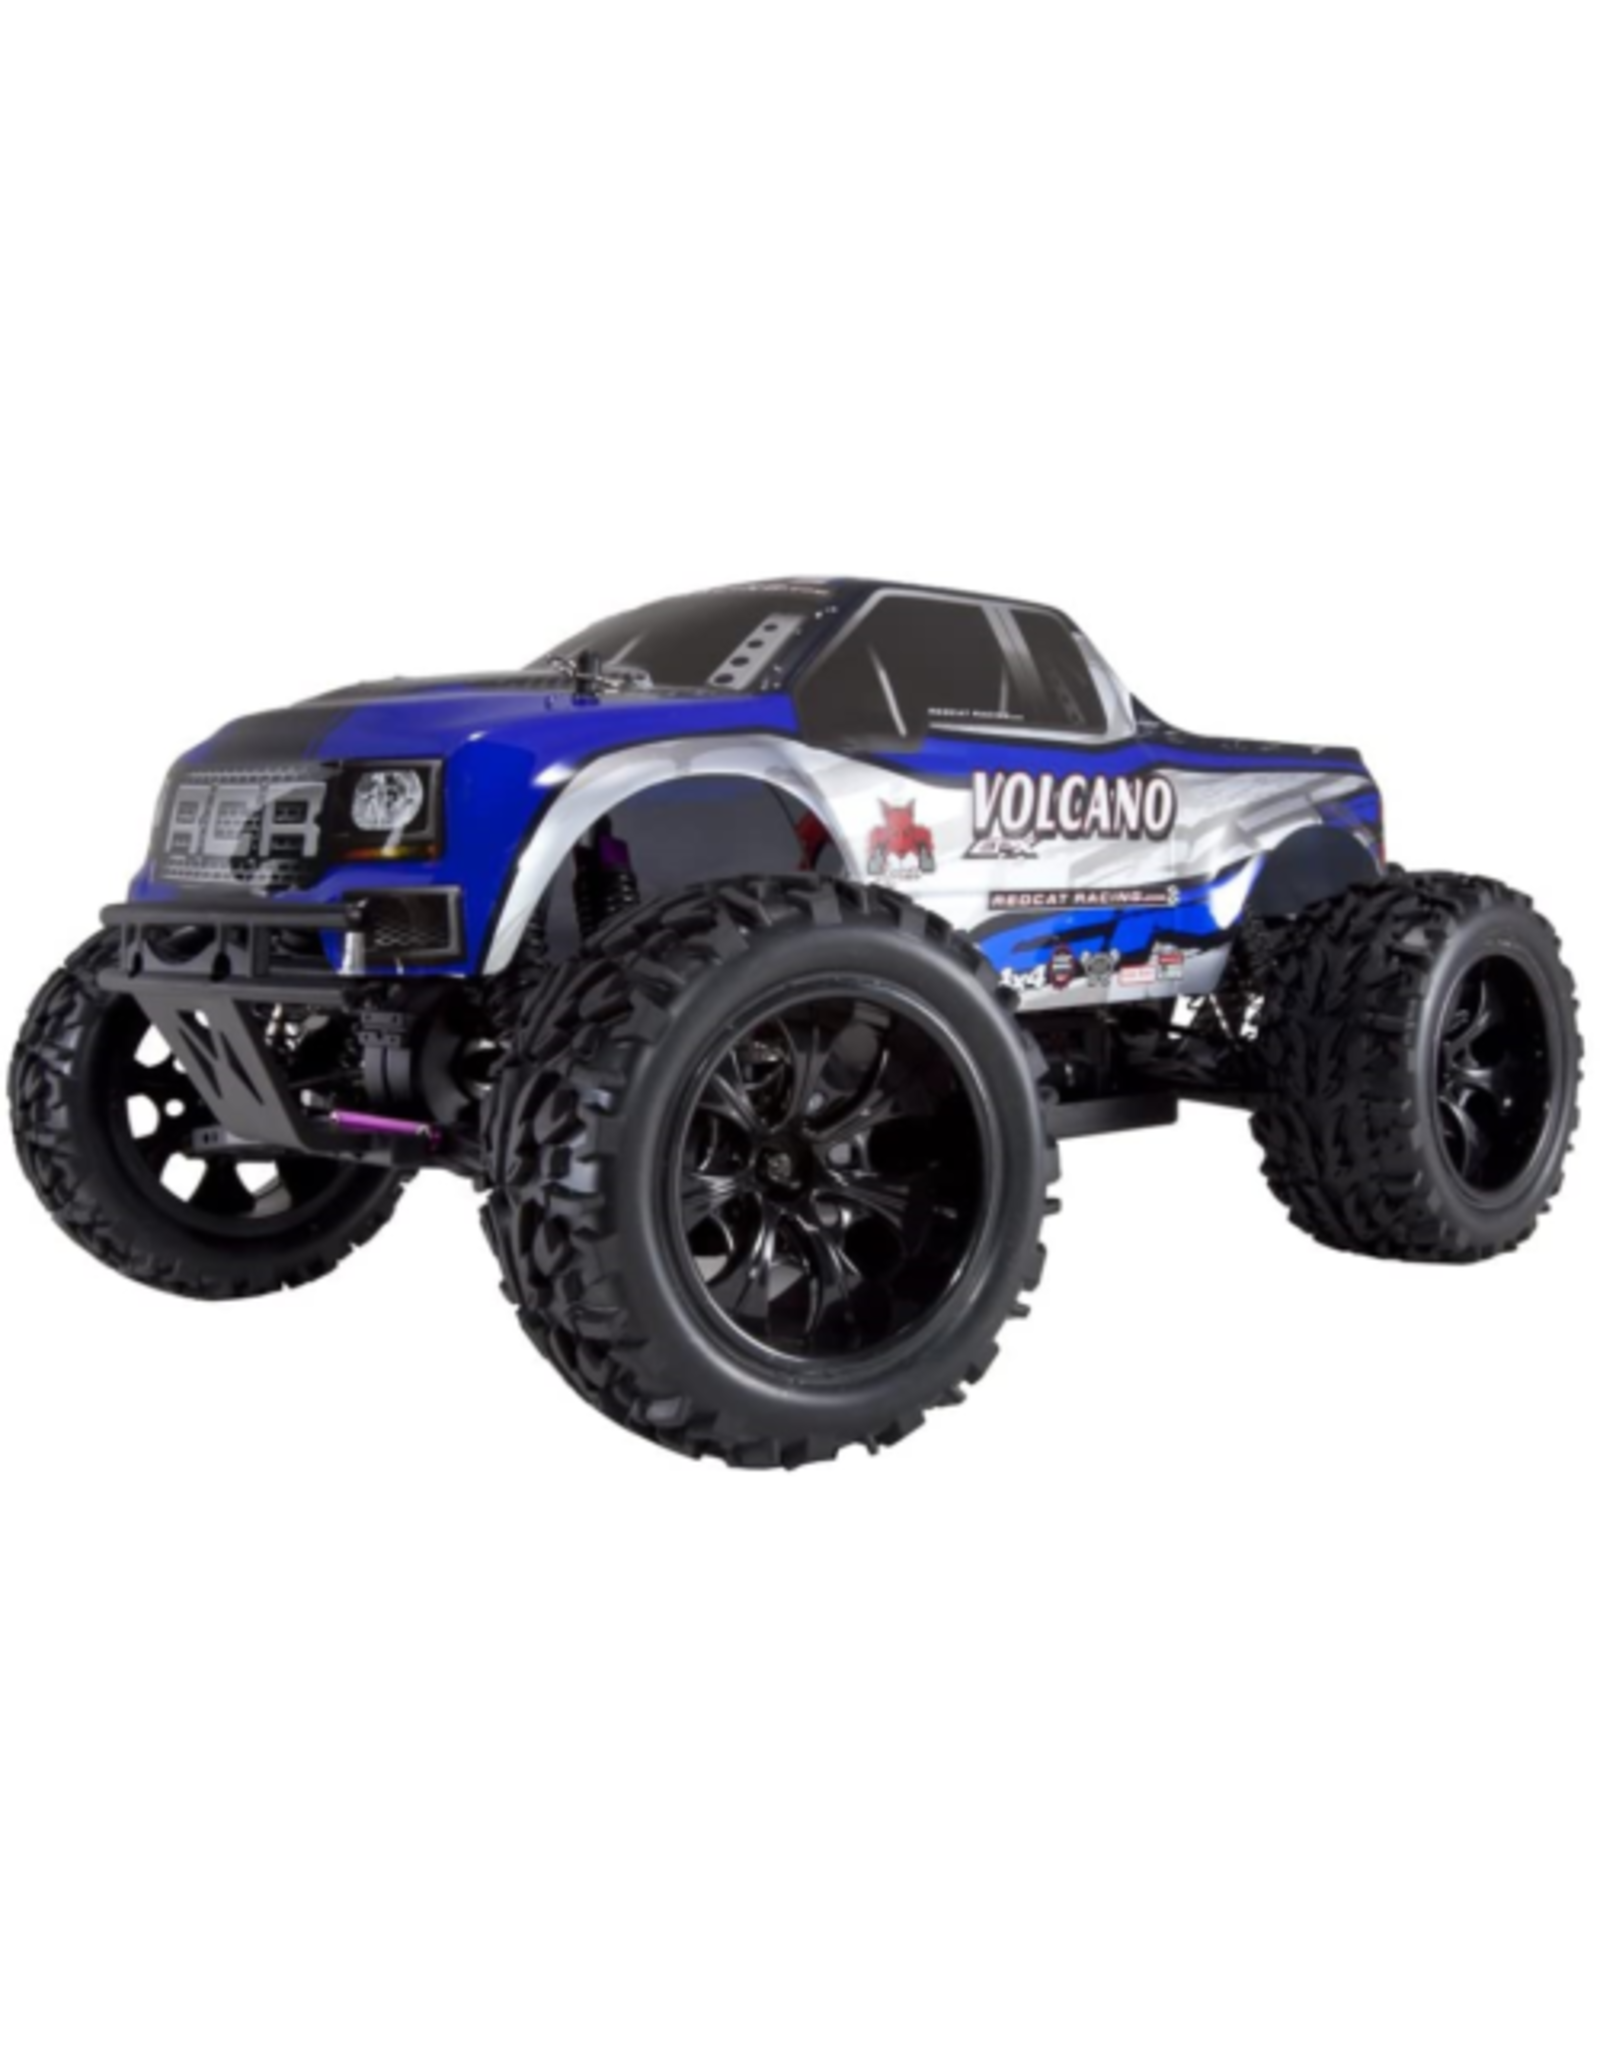 Red Cat Copy of Volcano Epx 1/10 4wd electric monster truck Blue